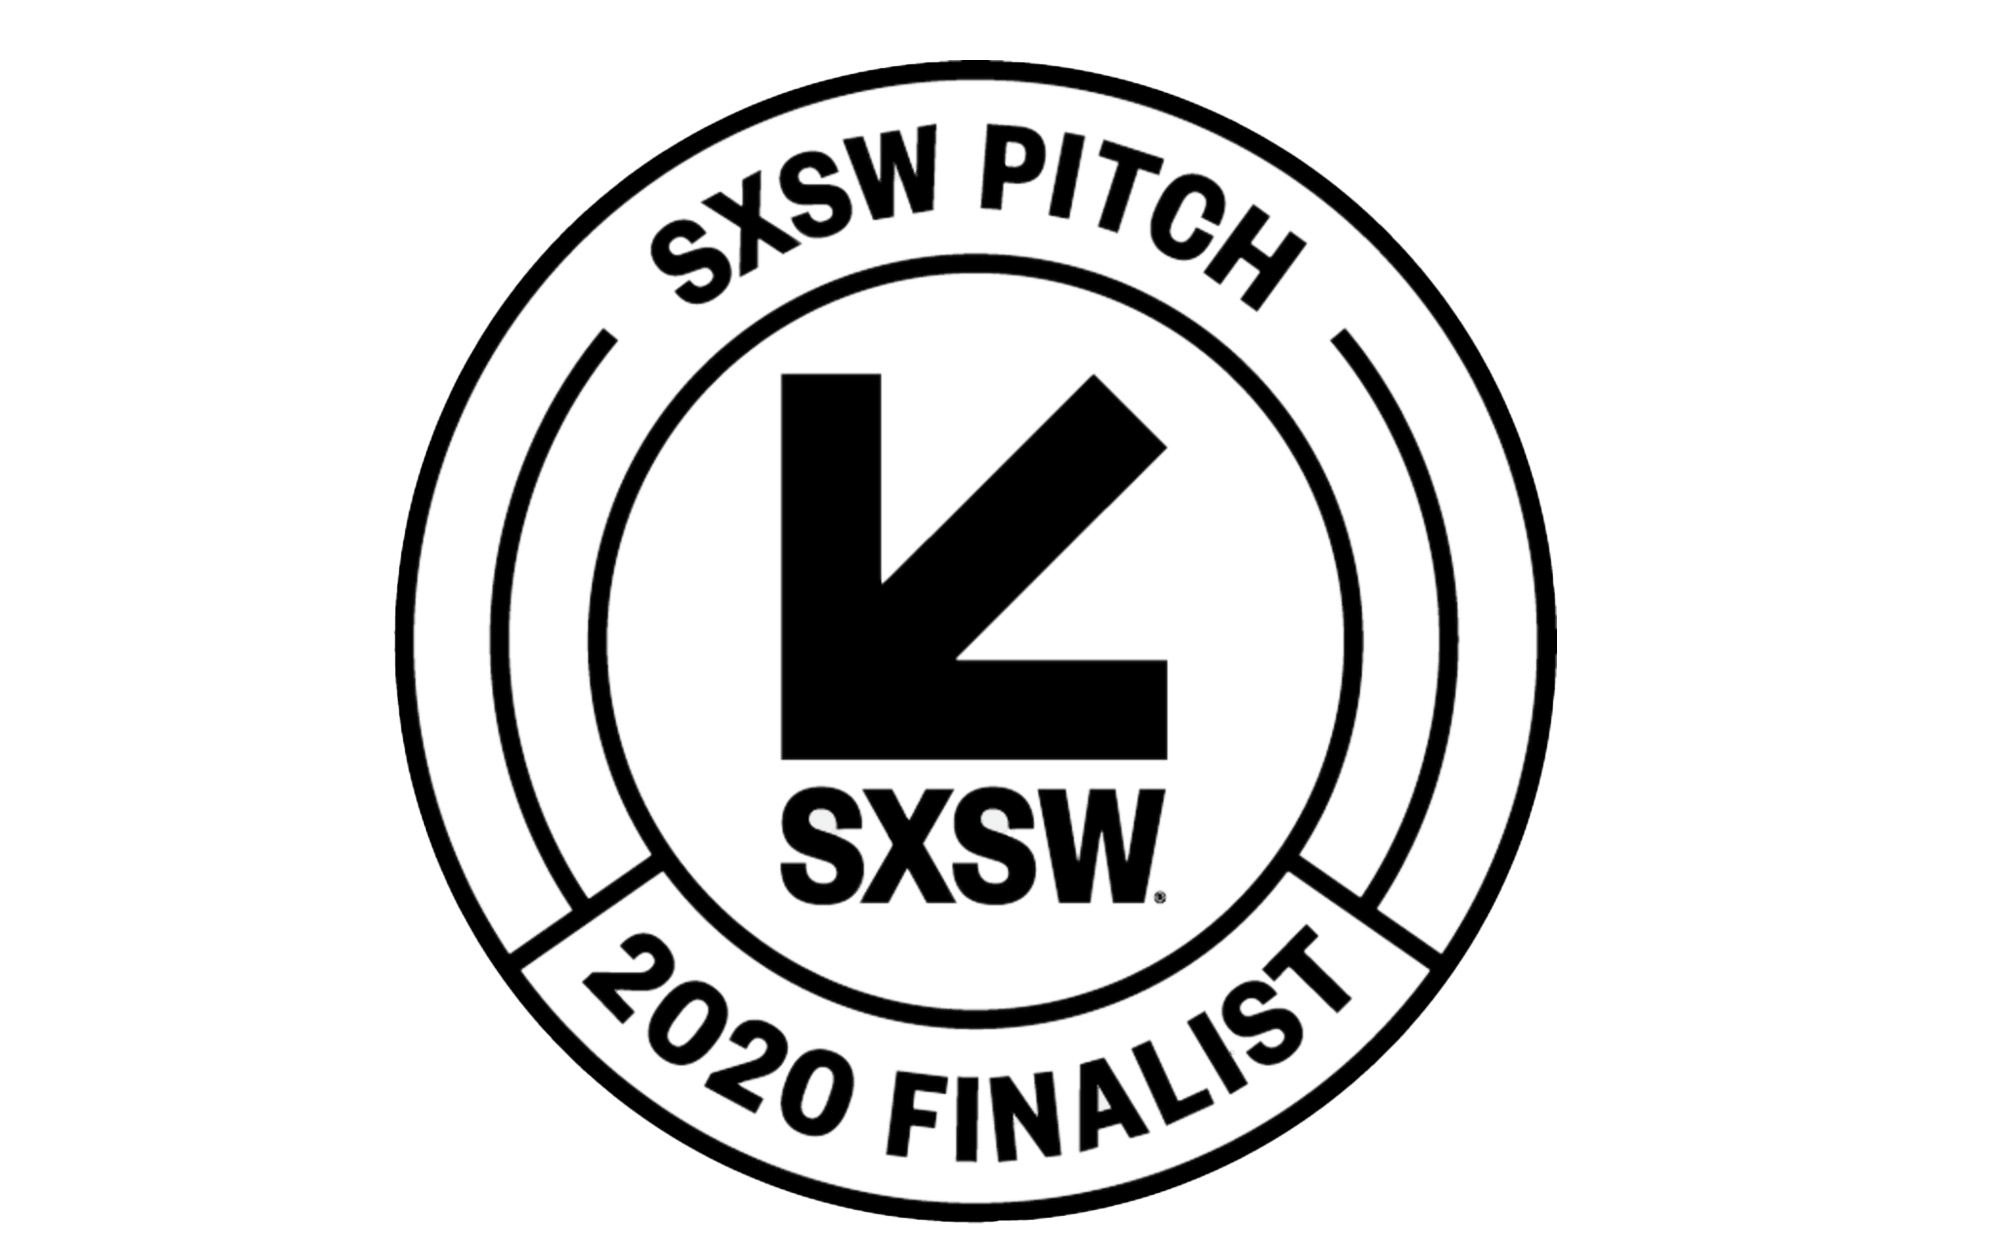 SXSW Finalists 2020 Logo On A White Background In PNG Format